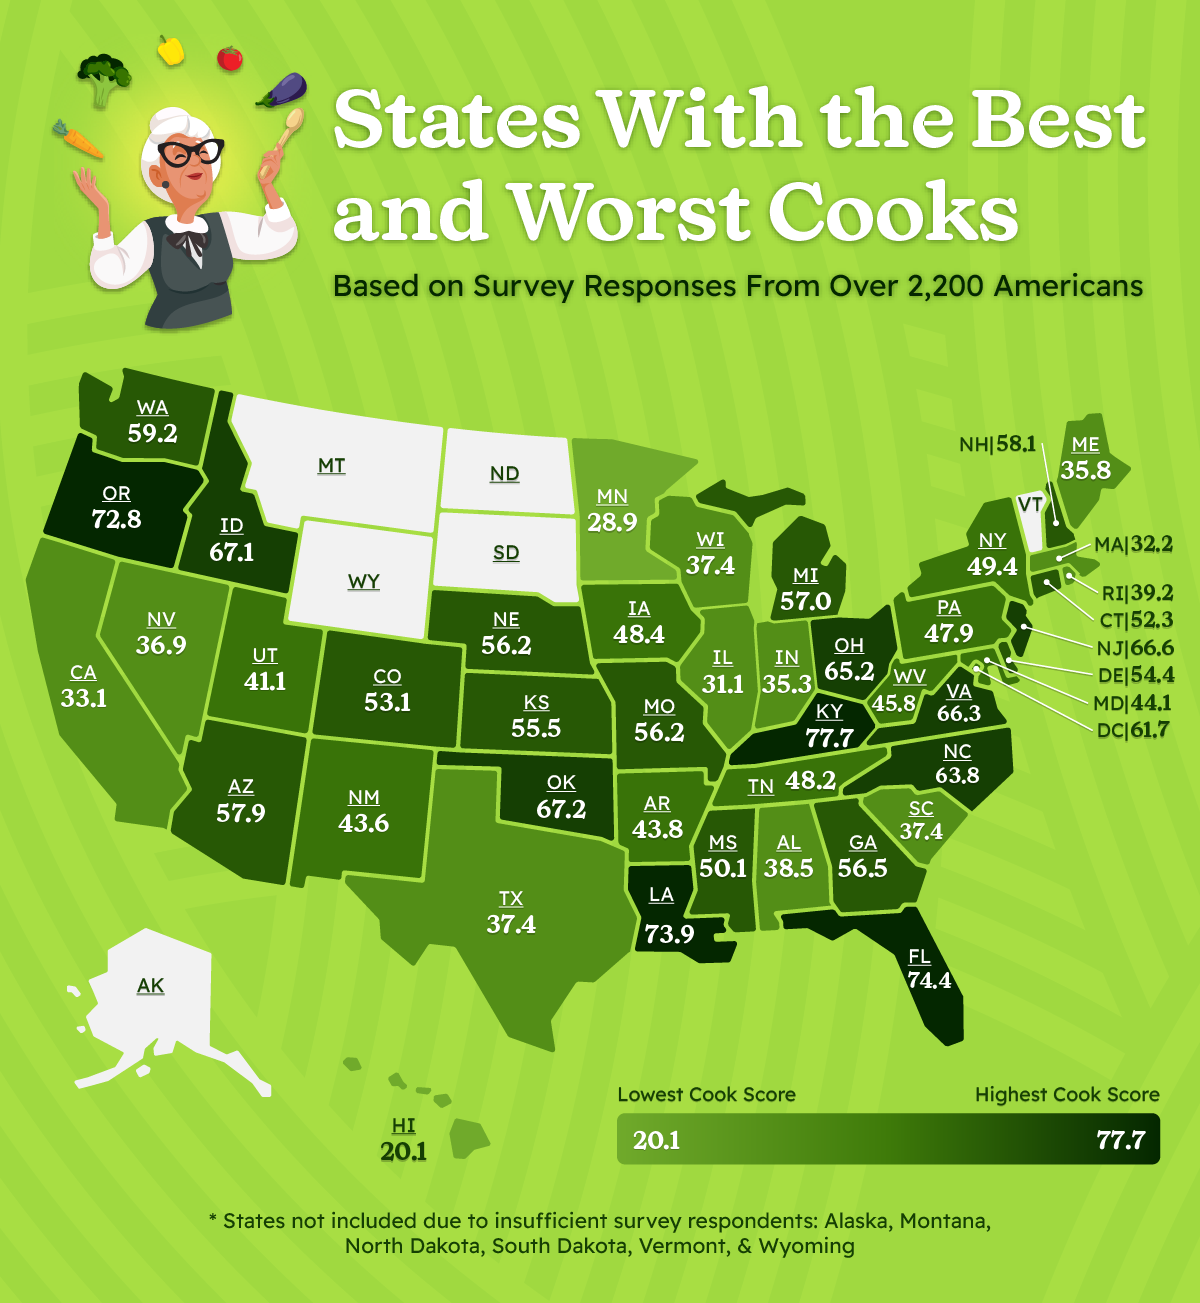 A U.S. heat map showing the states with the best and worst cooks